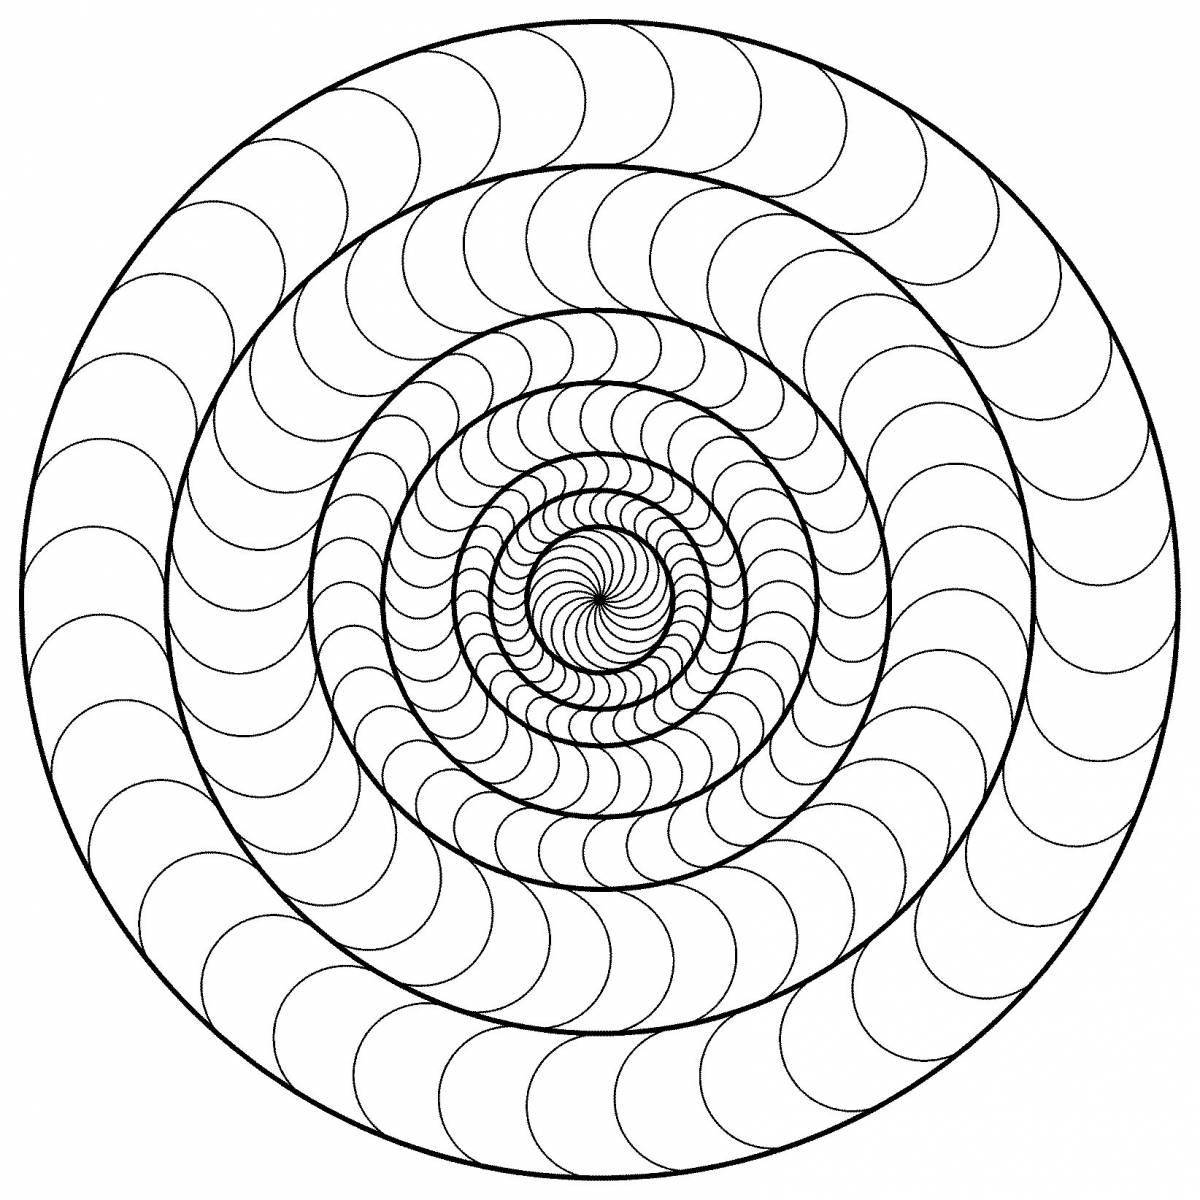 Color spiral coloring page